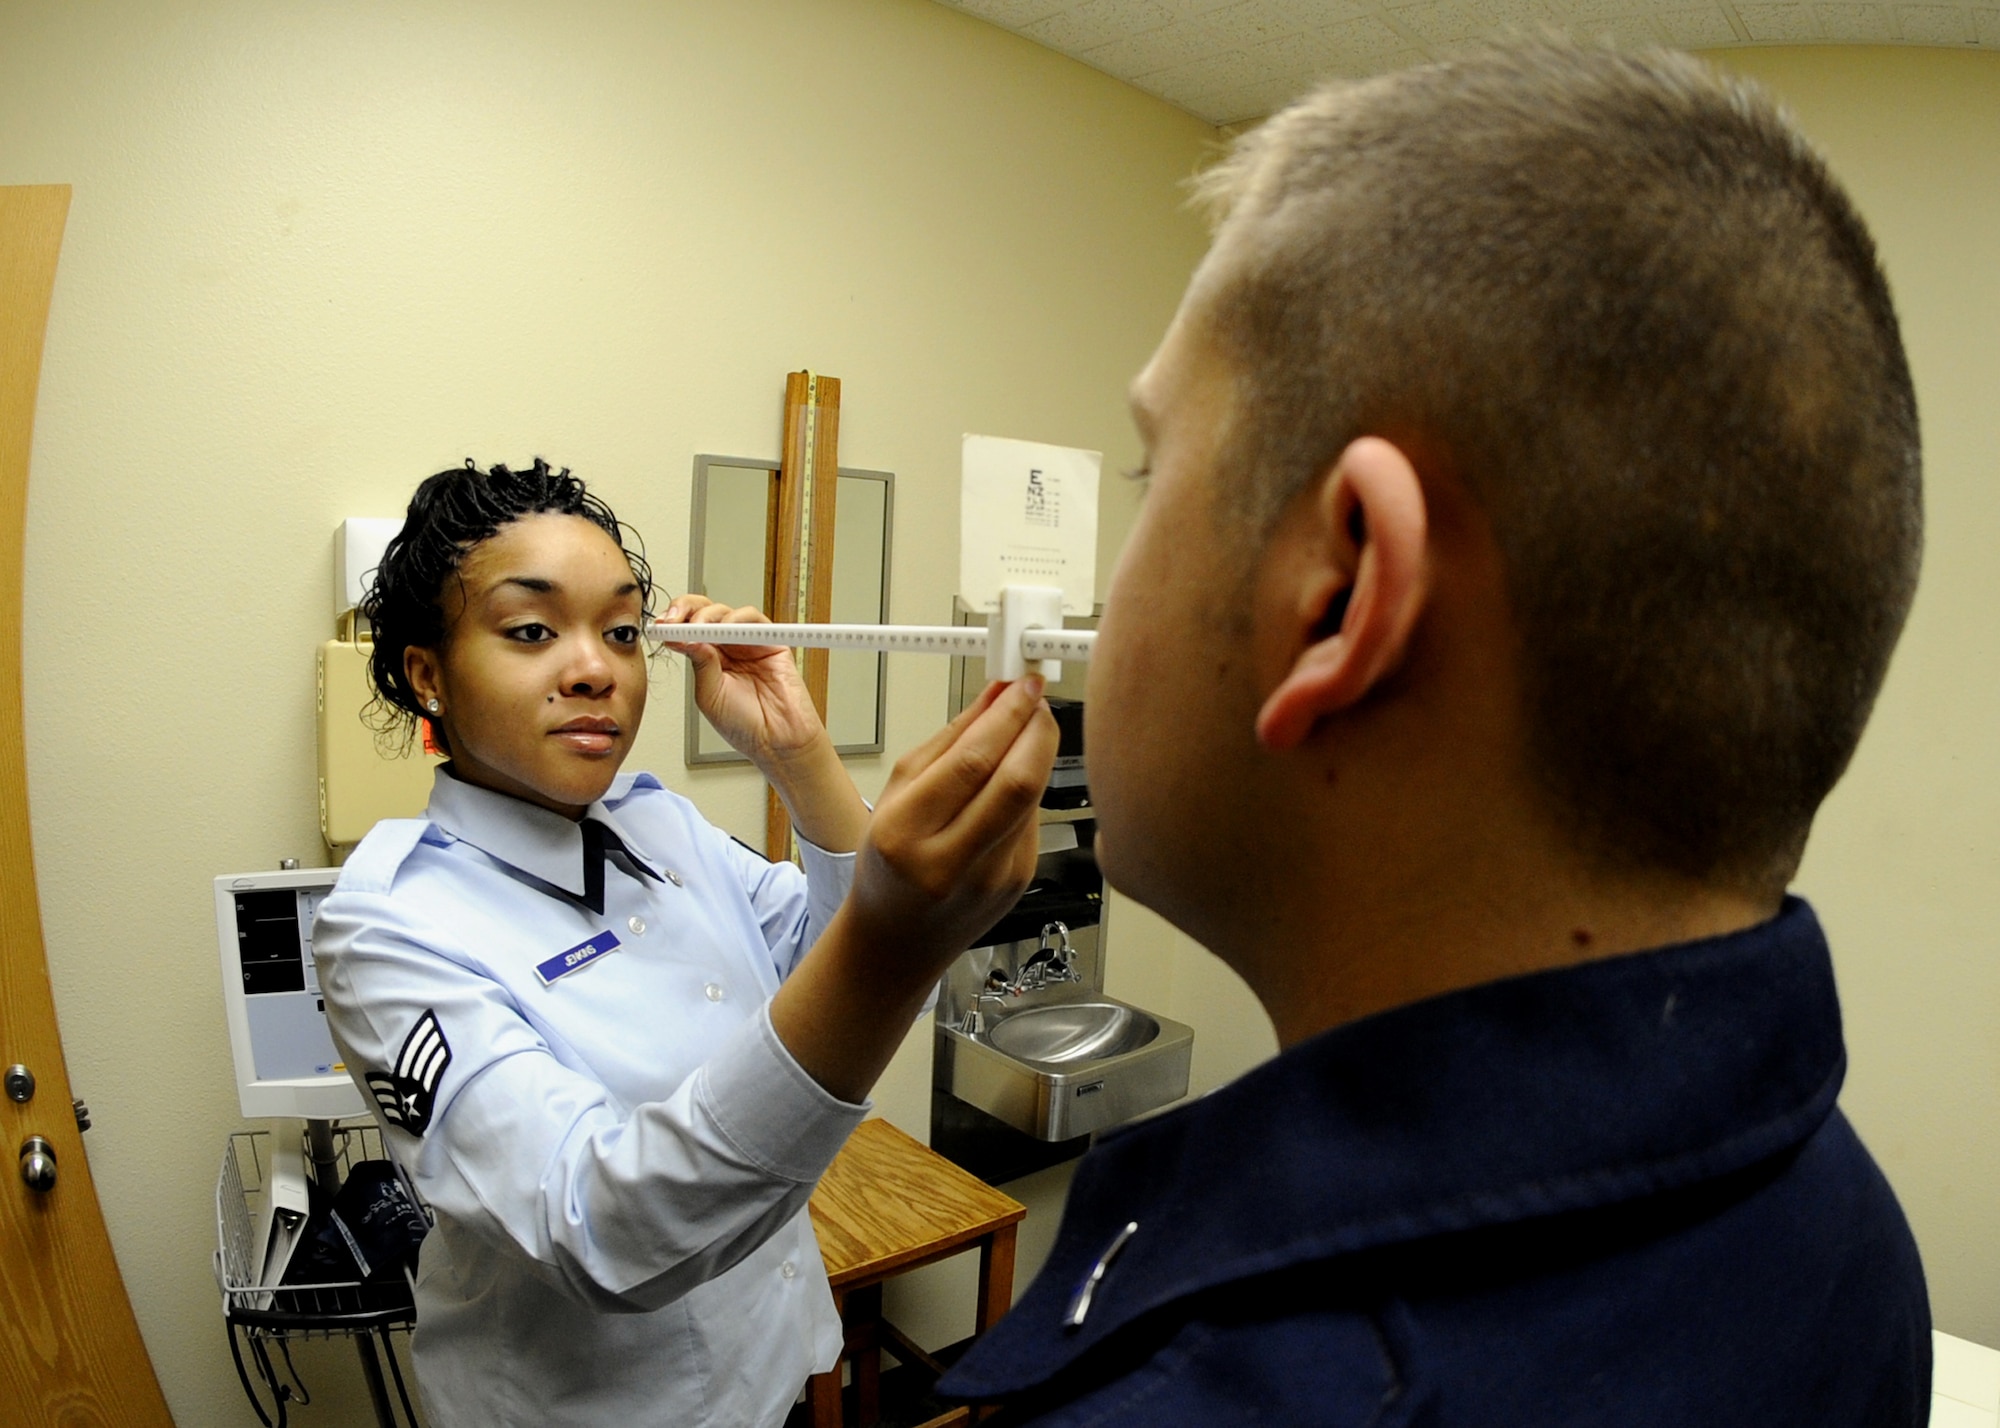 MINOT AIR FORCE BASE, N.D. -- Senior Airman Erika Jenkins, 23rd Bomb Squadron aerospace medical technician, performs an eye test on Airman 1st Class Christopher Stone, 5th Medical Operations Squadron healthcare service management technician, as part of readiness training Nov. 9 here. Eye tests are part of the initial flying class physical and an annual requirement for aircrew members. The medical group was rated outstanding in 8 of the 16 topical graded areas during the Air Force Inspection Agency Health Services Inspection and captured an overall excellent rating. (U.S. Air Force photo by Senior Airman Michael Veloz)